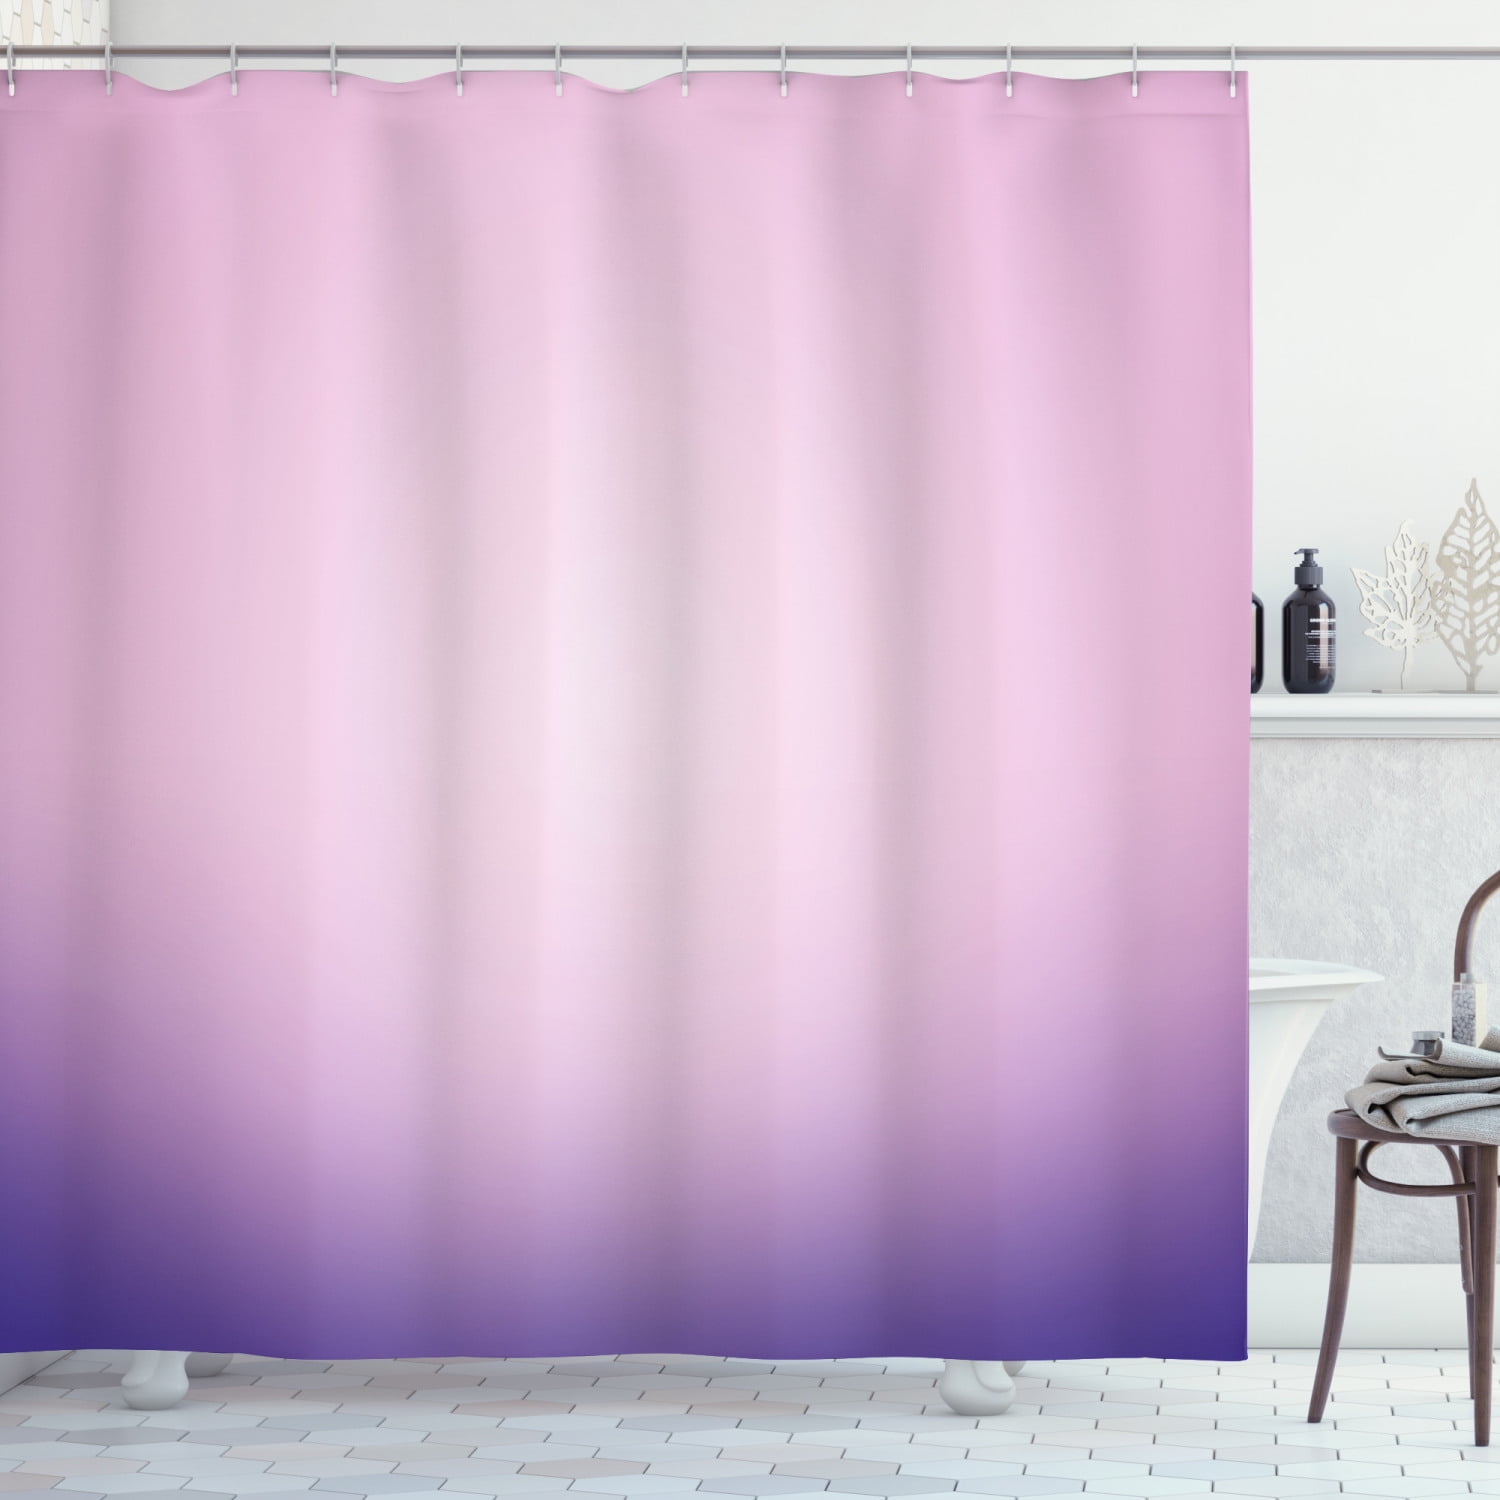 Shower Curtain Butterfly Flower Lake Pink Blue Lilac 72x78 Gift Bathroom New 